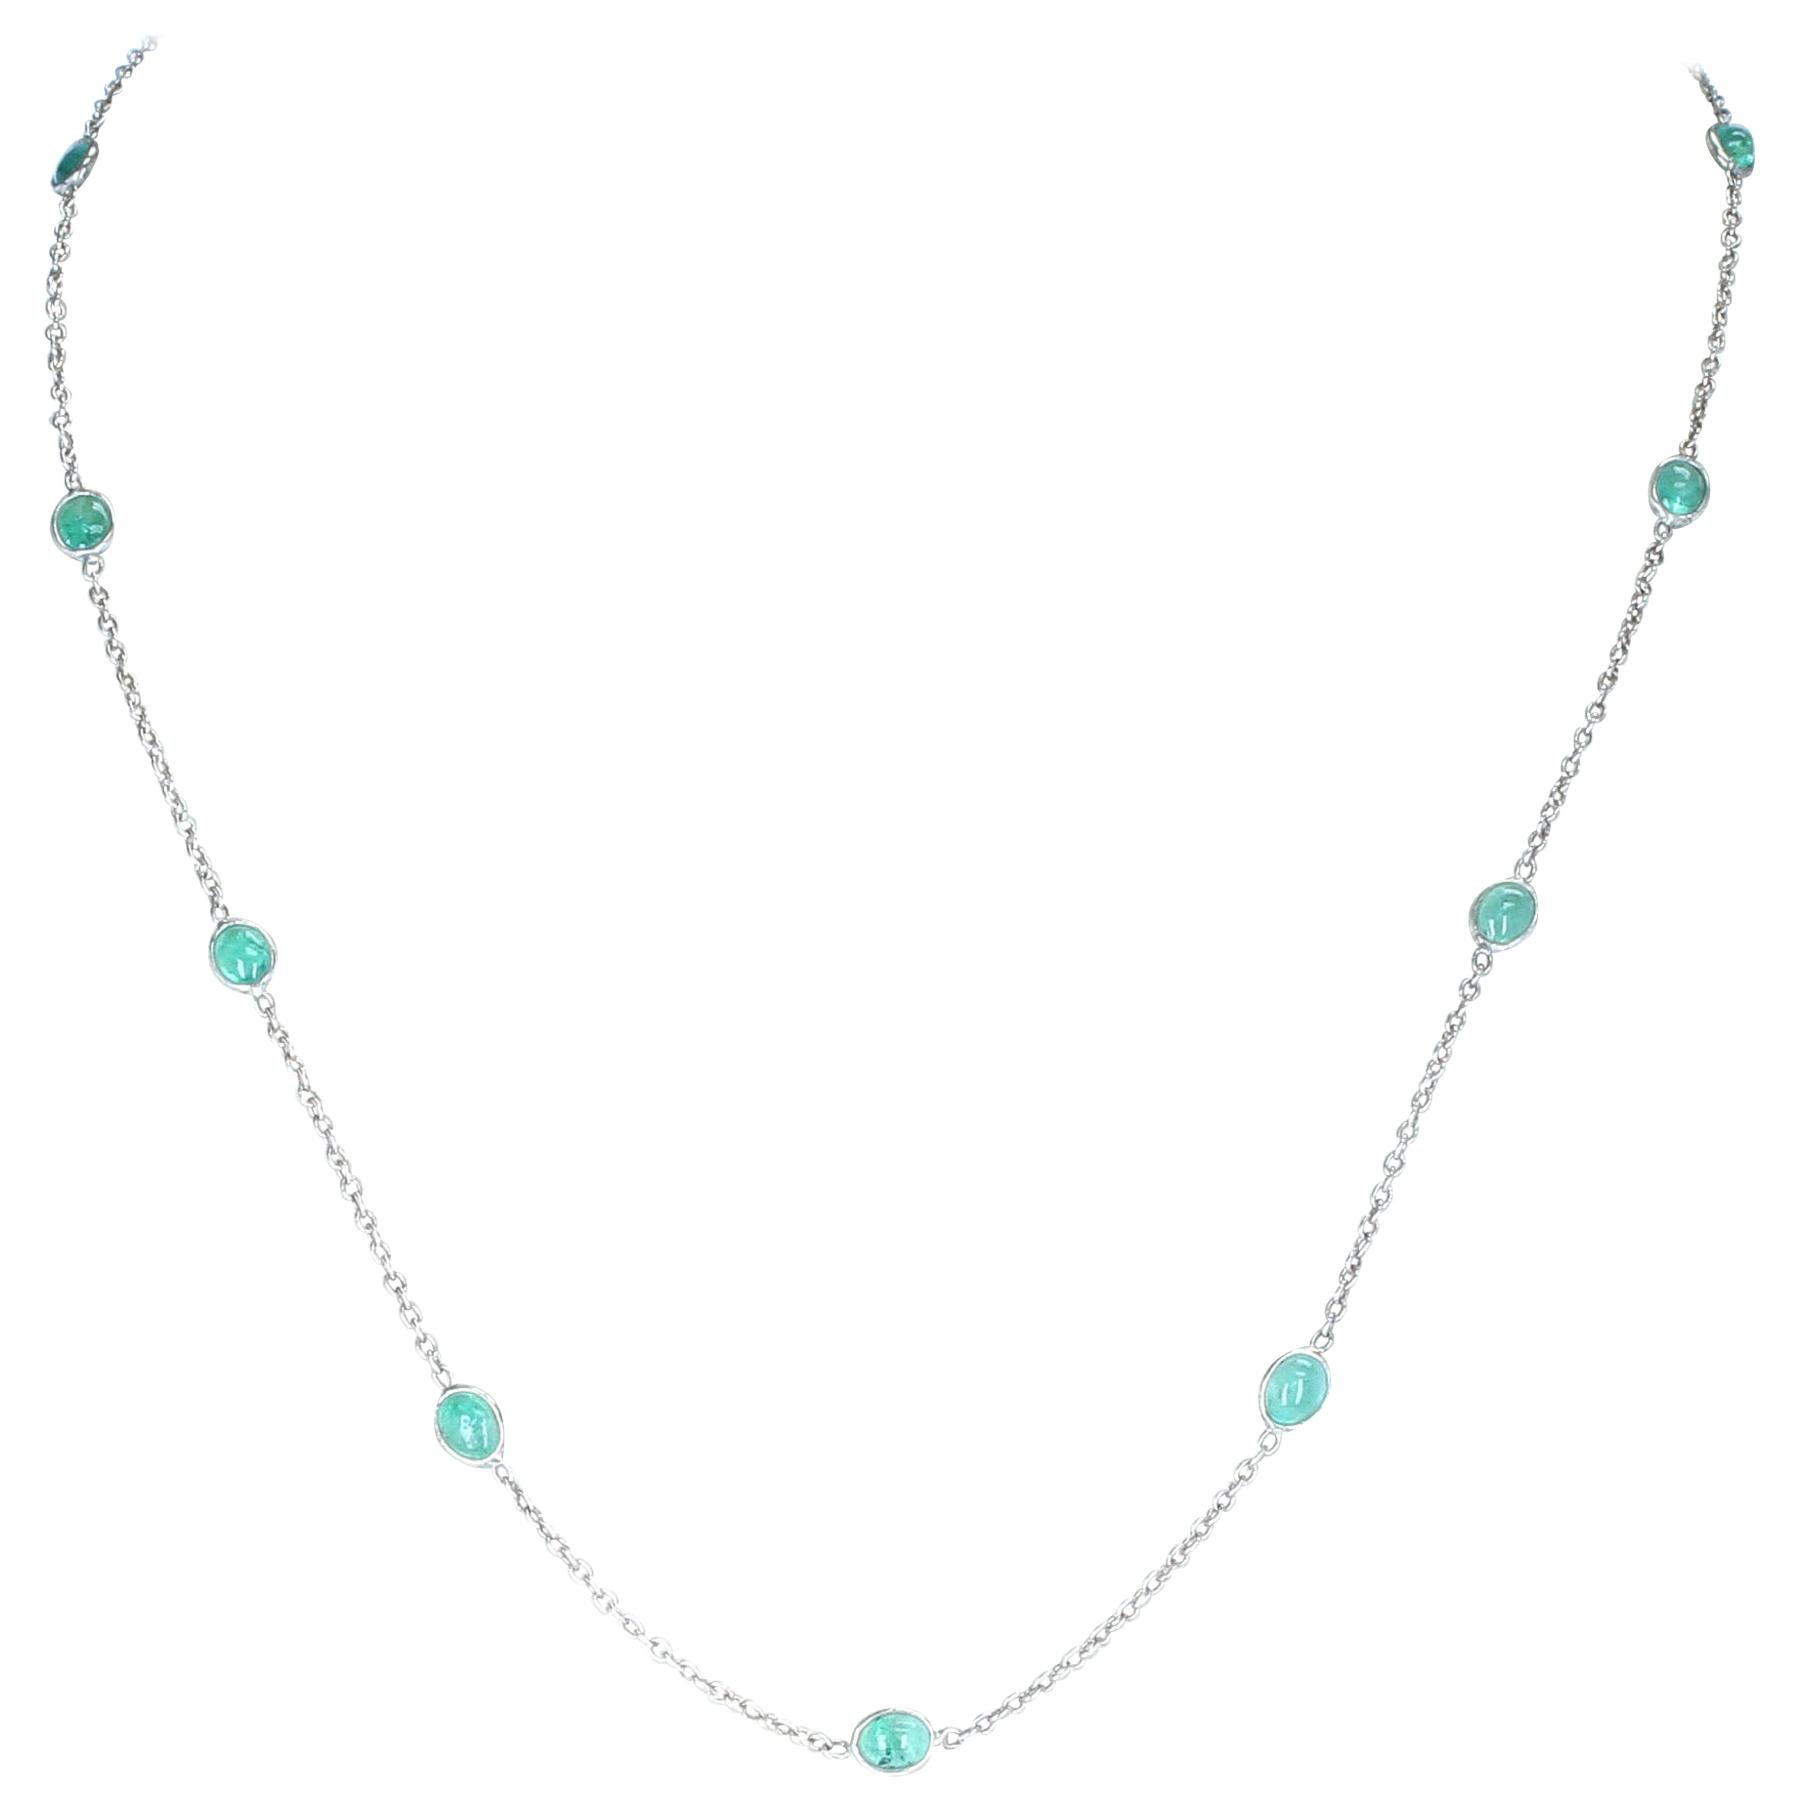 Emerald Cabochon Necklace For Sale